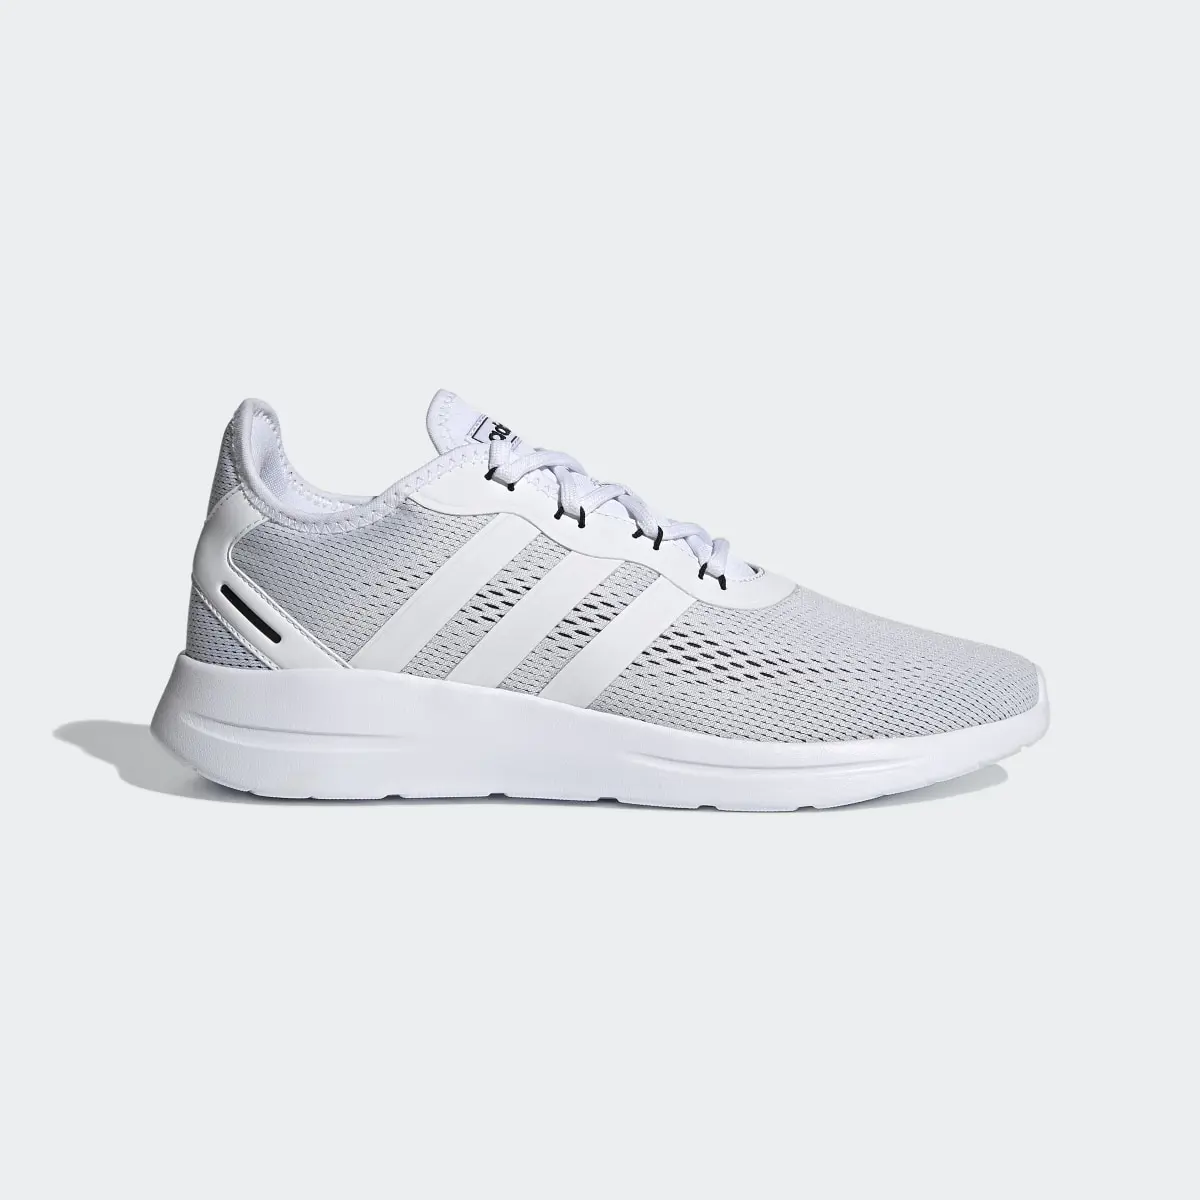 Adidas Lite Racer RBN 2.0 Shoes. 2